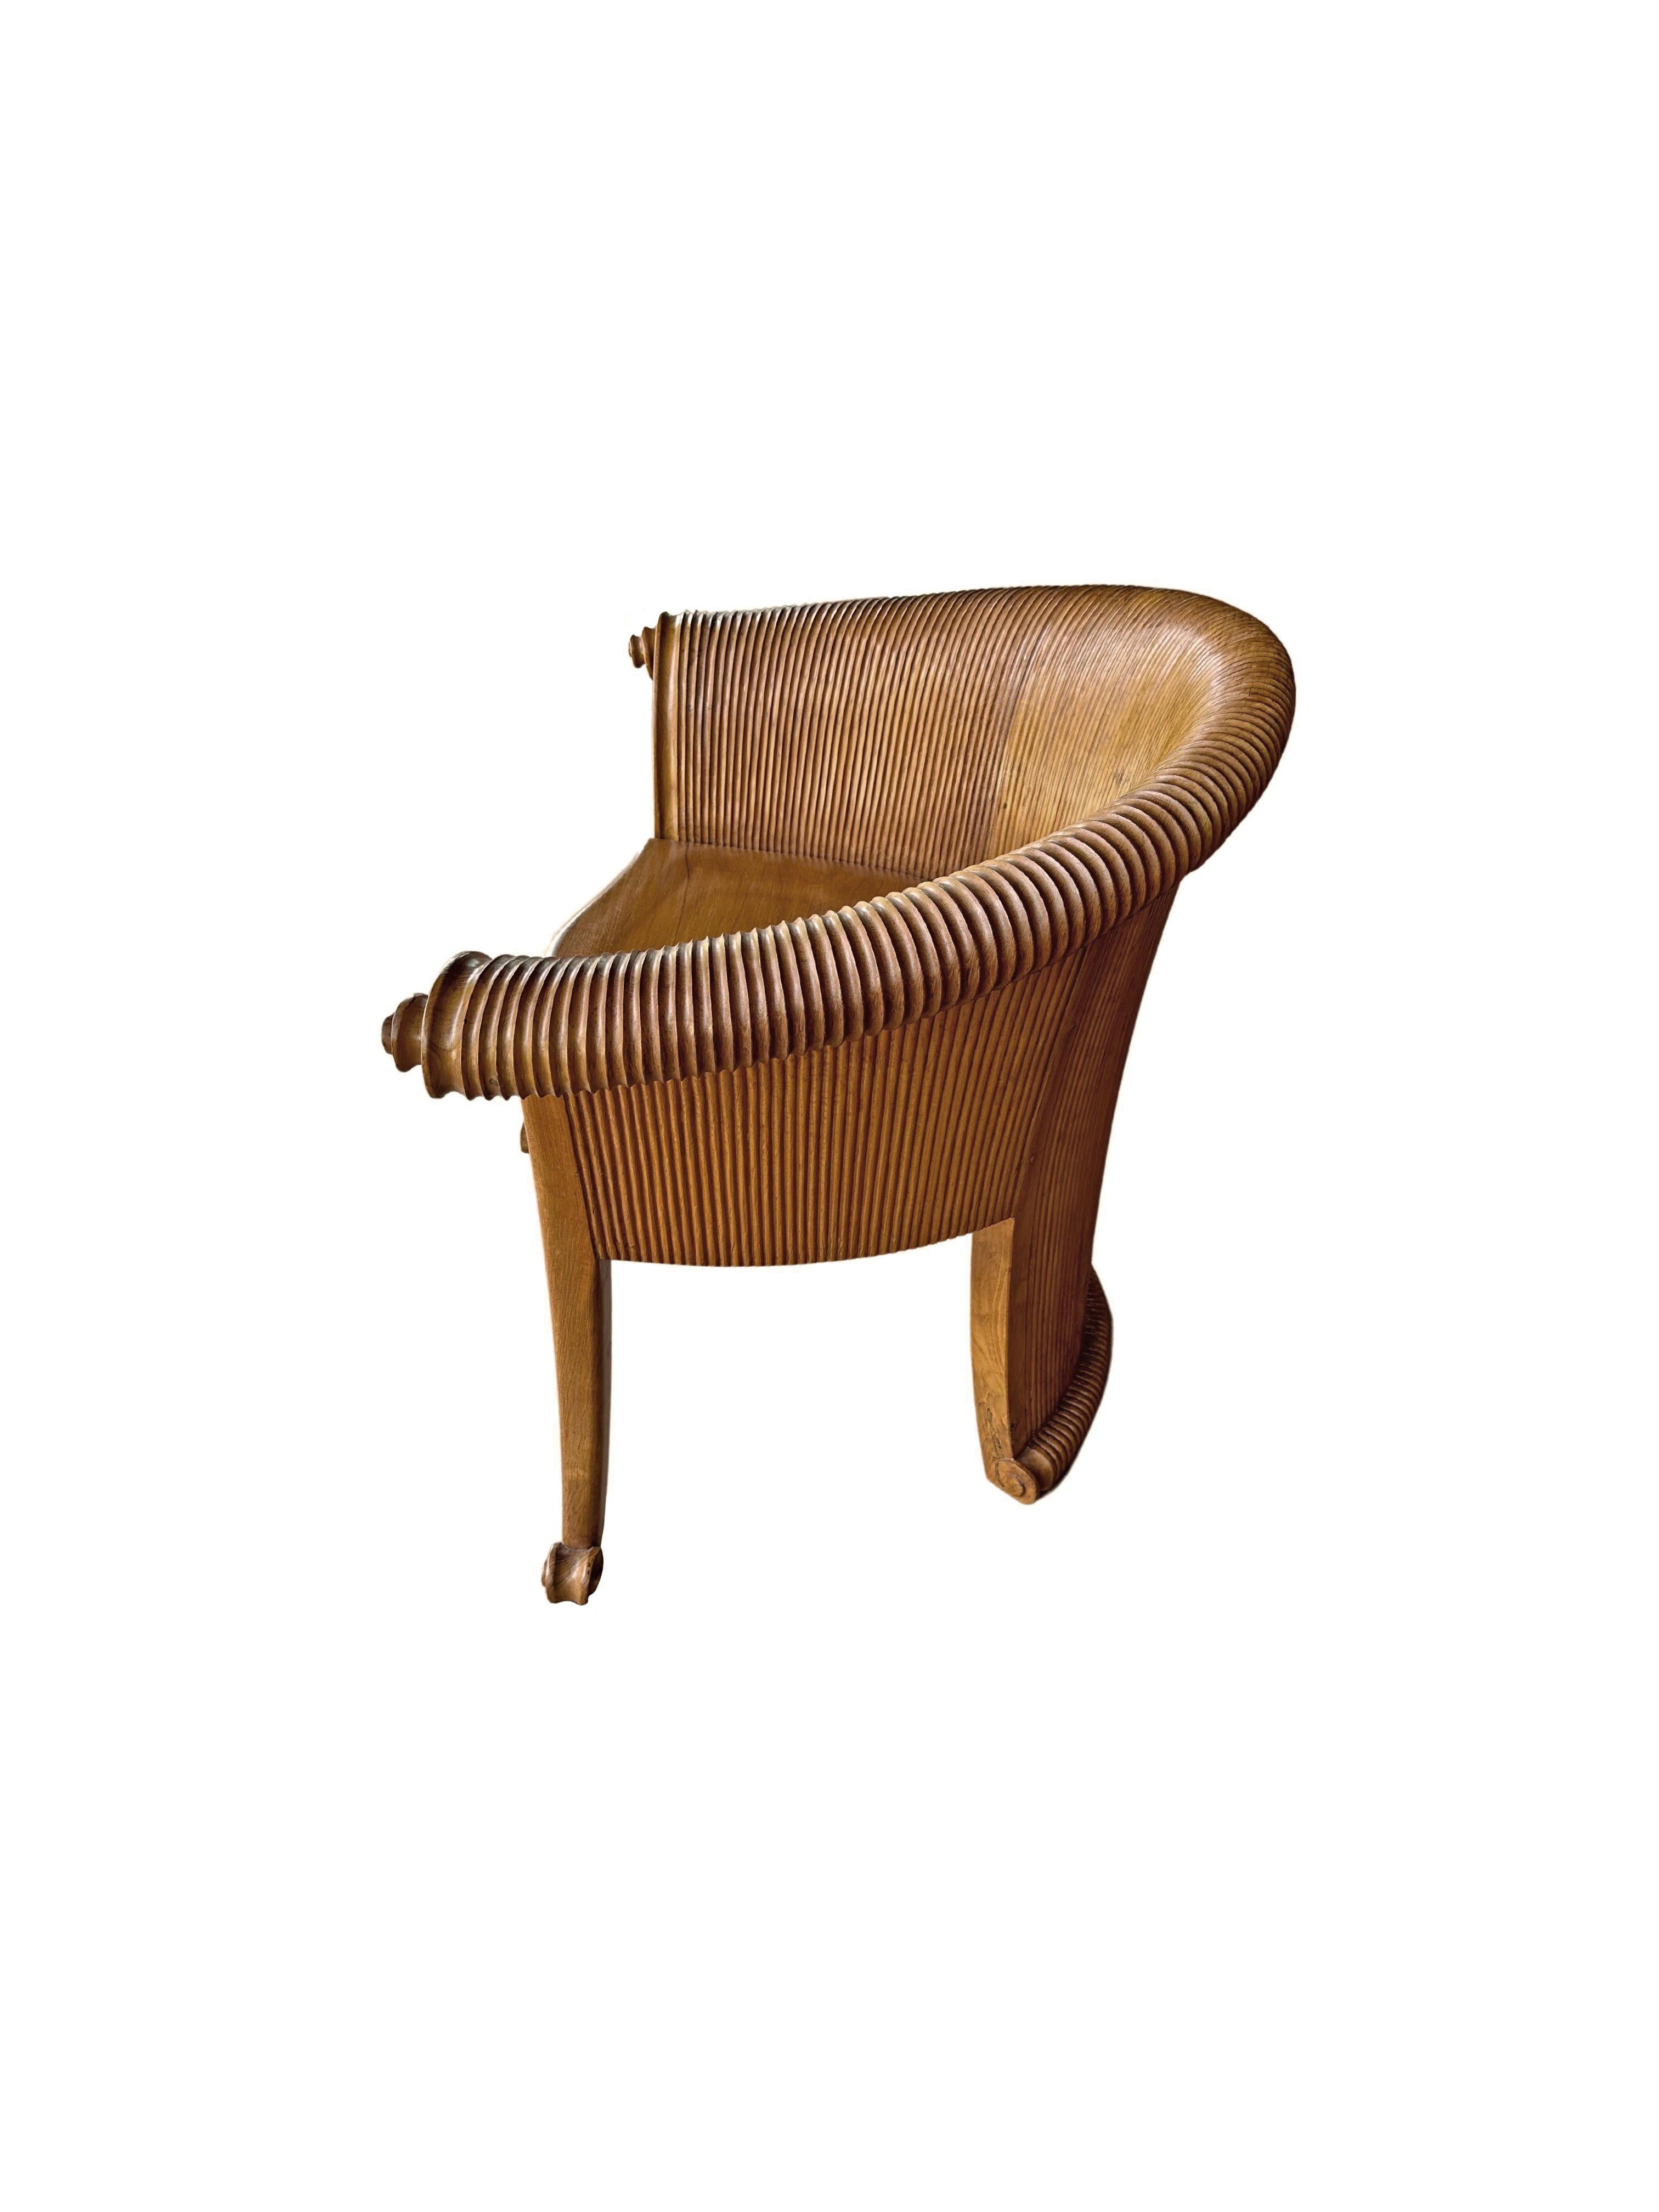 Hand-Crafted Sculptural Teak Wood Chair with Carved Detailing For Sale